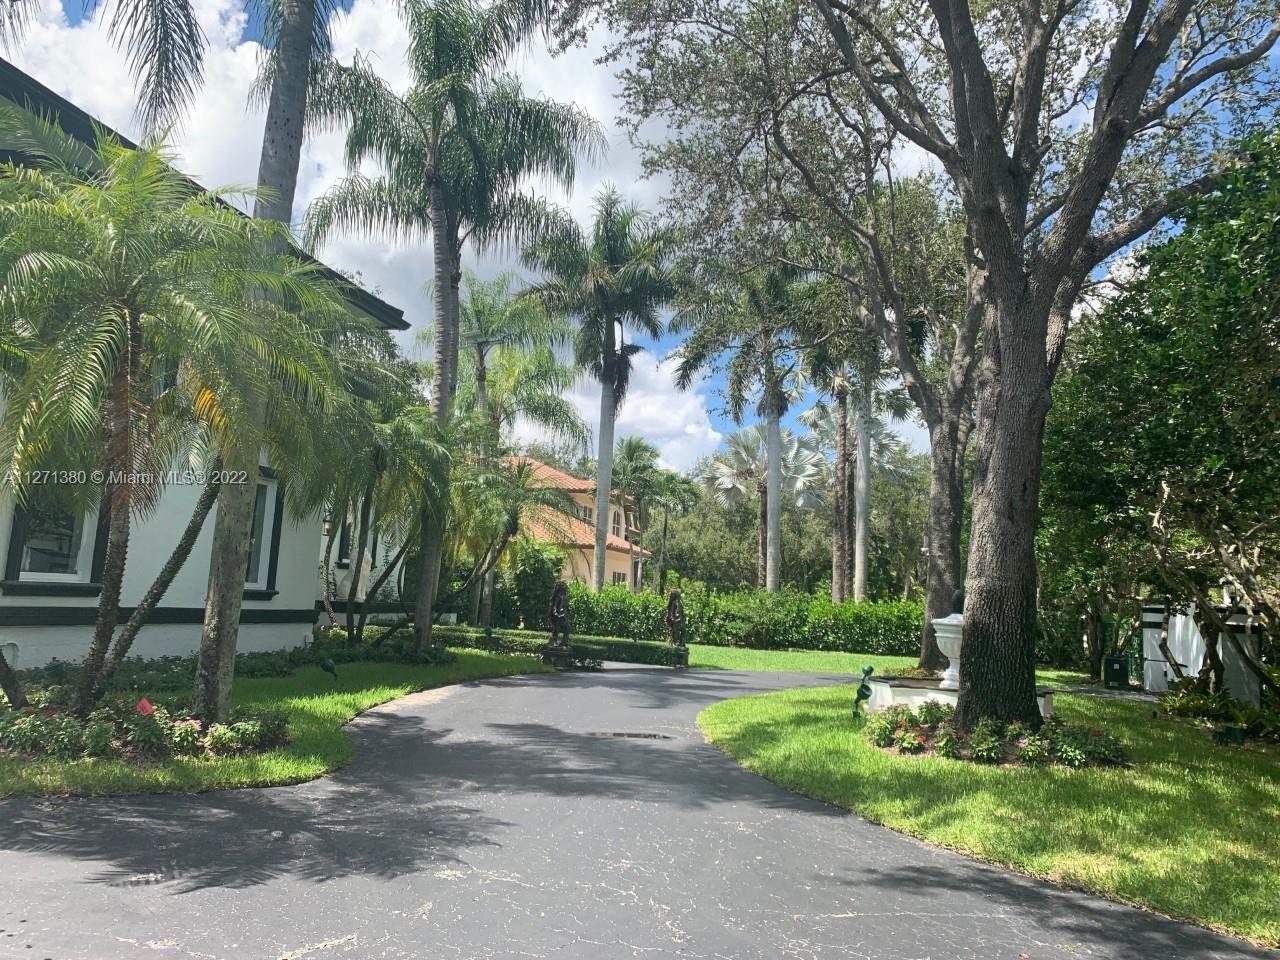 Beautiful 5/5/1 house in Pinecrest! Completely remodeled. Spectacular  modern kitchen! Tiled pool and jacuzzi. A lot of space to park many cars. Space to park RV or boat.  Gated for privacy. Impact windows and doors. Tennis court now used as parking but can be restored as tennis court. A must see!